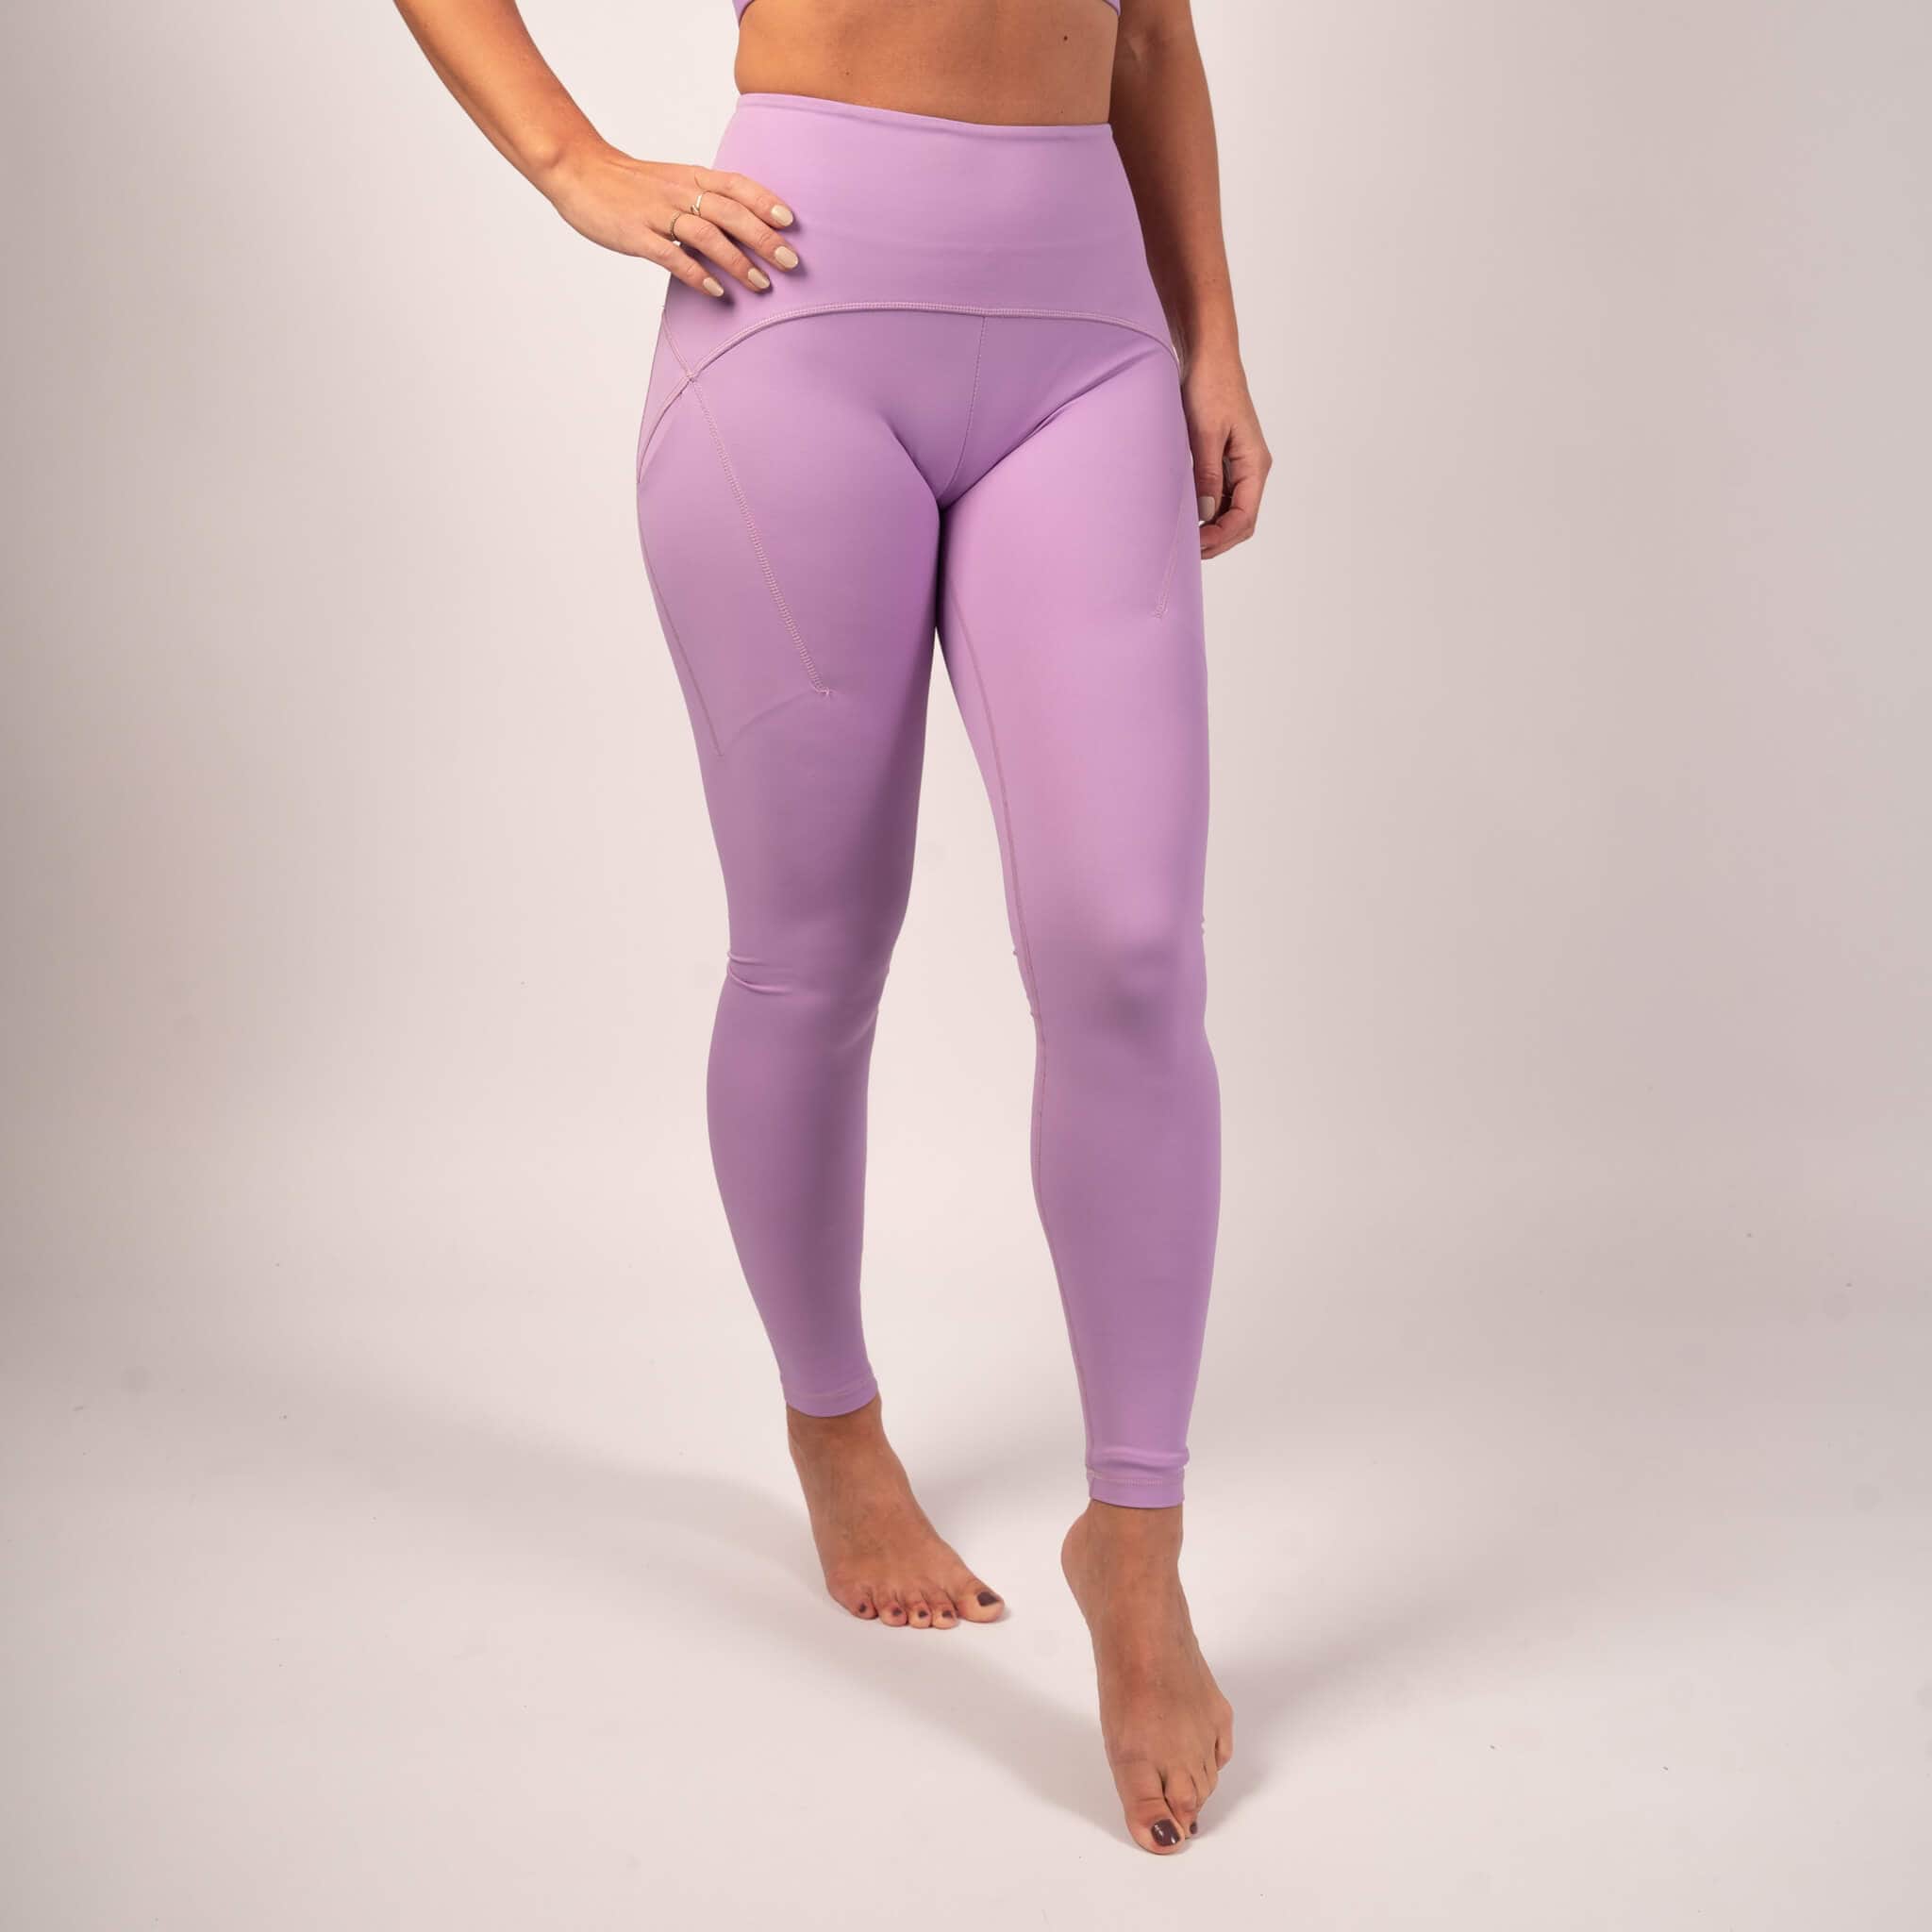  PaletteFit High Waisted Workout Leggings for Women, Buttery  Soft Yoga Pants, 7/8 Length Leggings with Hidden Pocket (Aurora Purple, XS)  : Clothing, Shoes & Jewelry